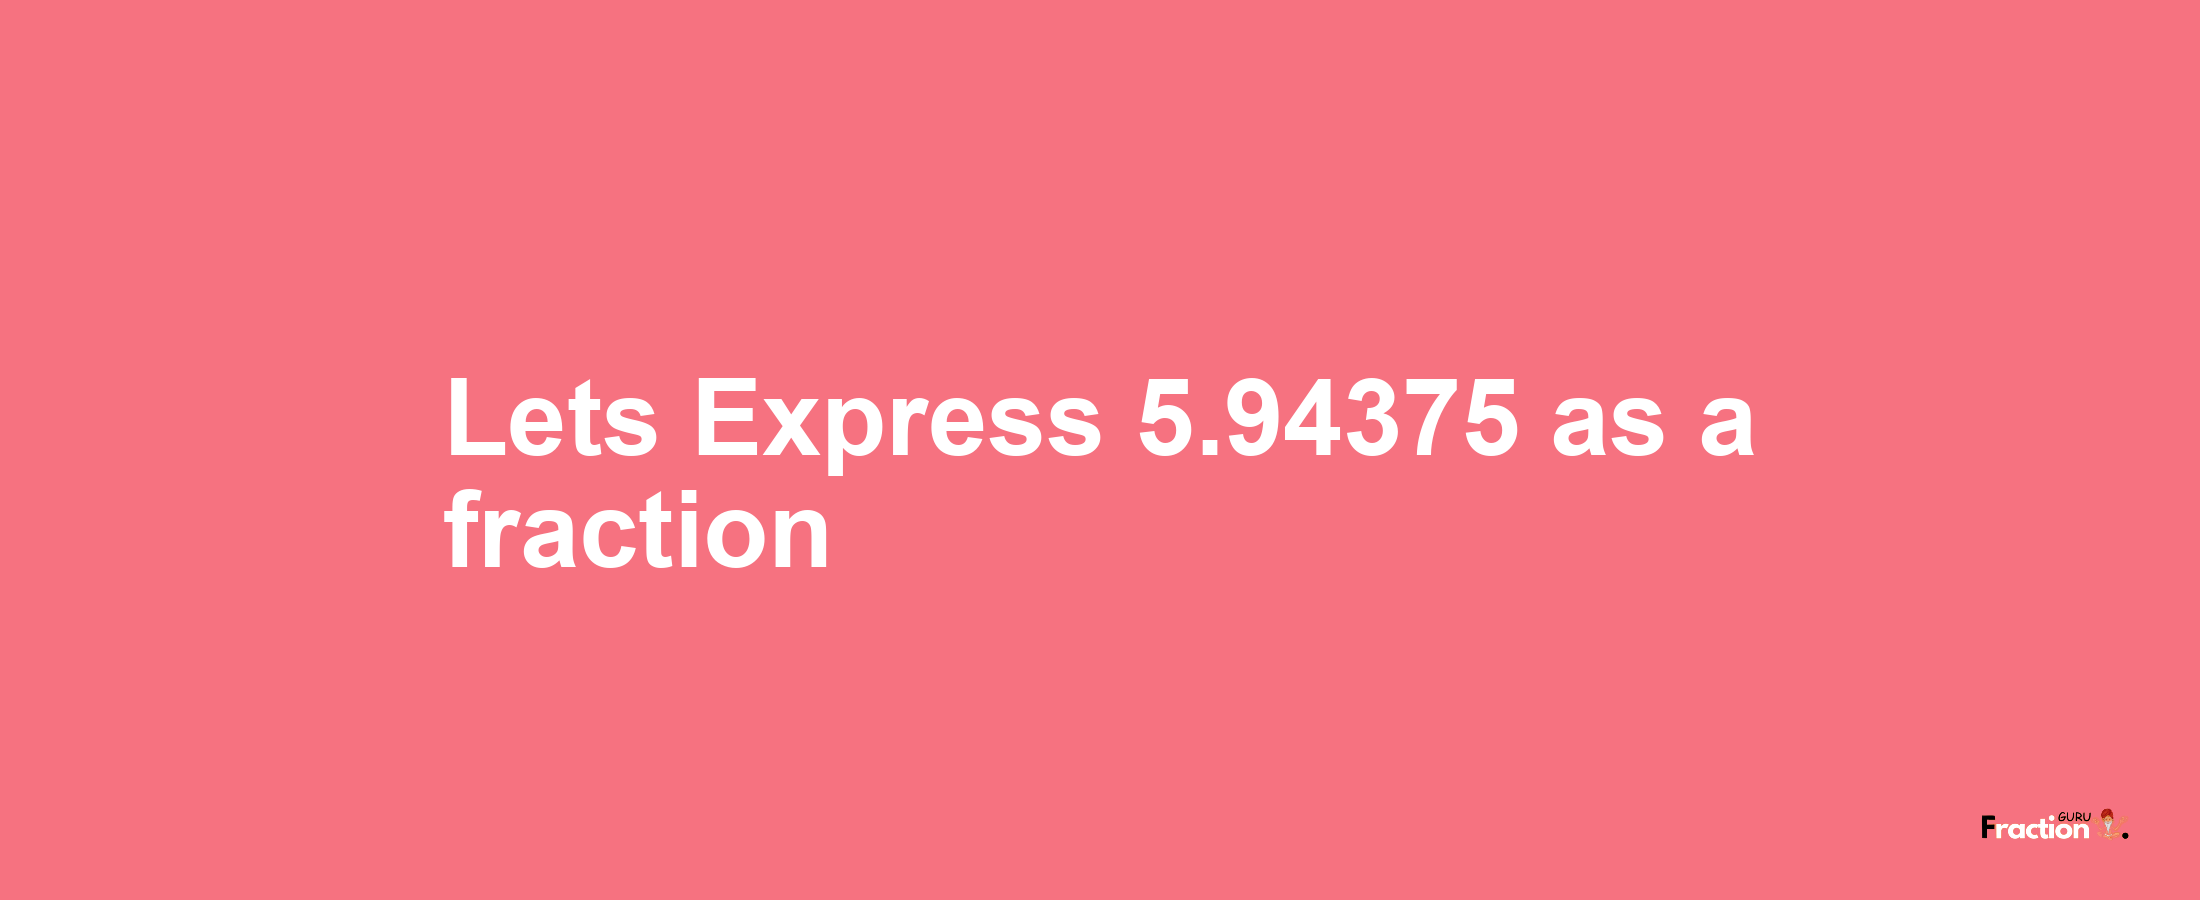 Lets Express 5.94375 as afraction